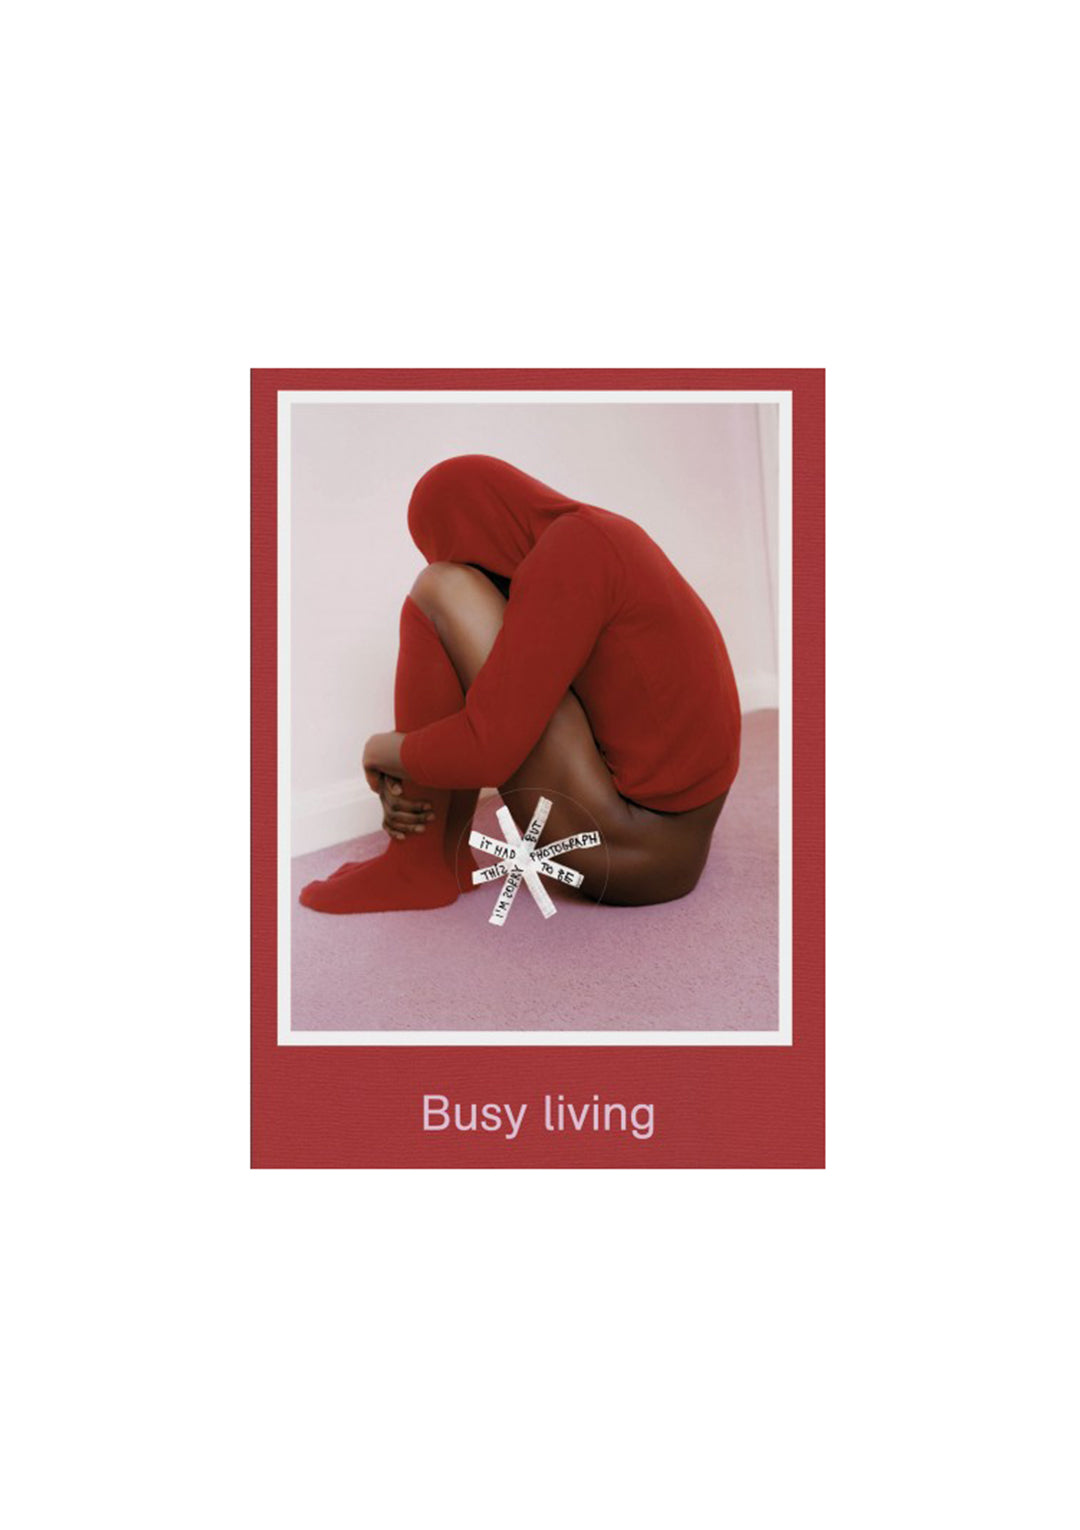 Busy Living (OUT OF PRINT, RARE)